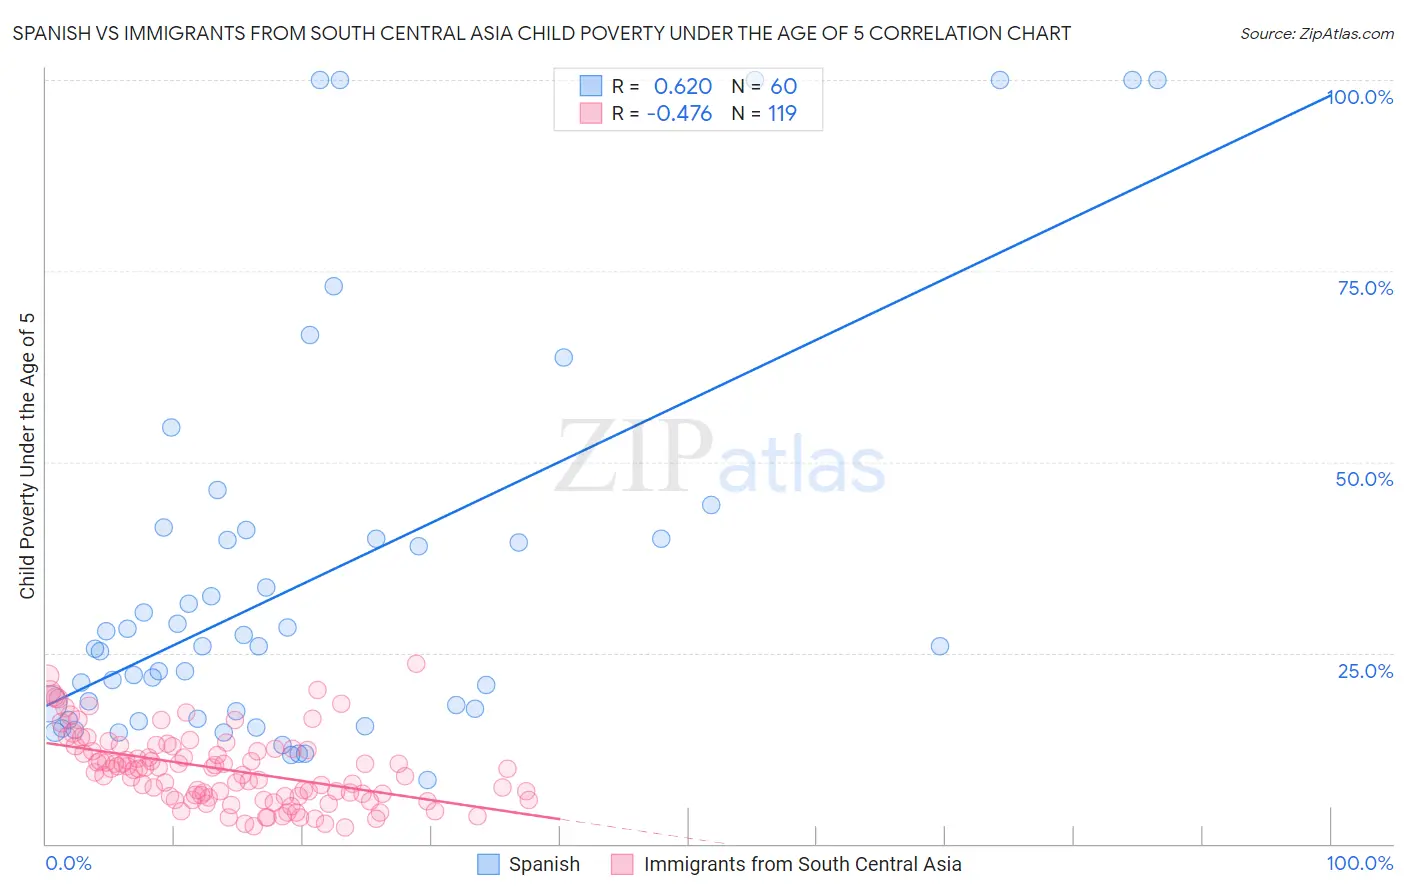 Spanish vs Immigrants from South Central Asia Child Poverty Under the Age of 5